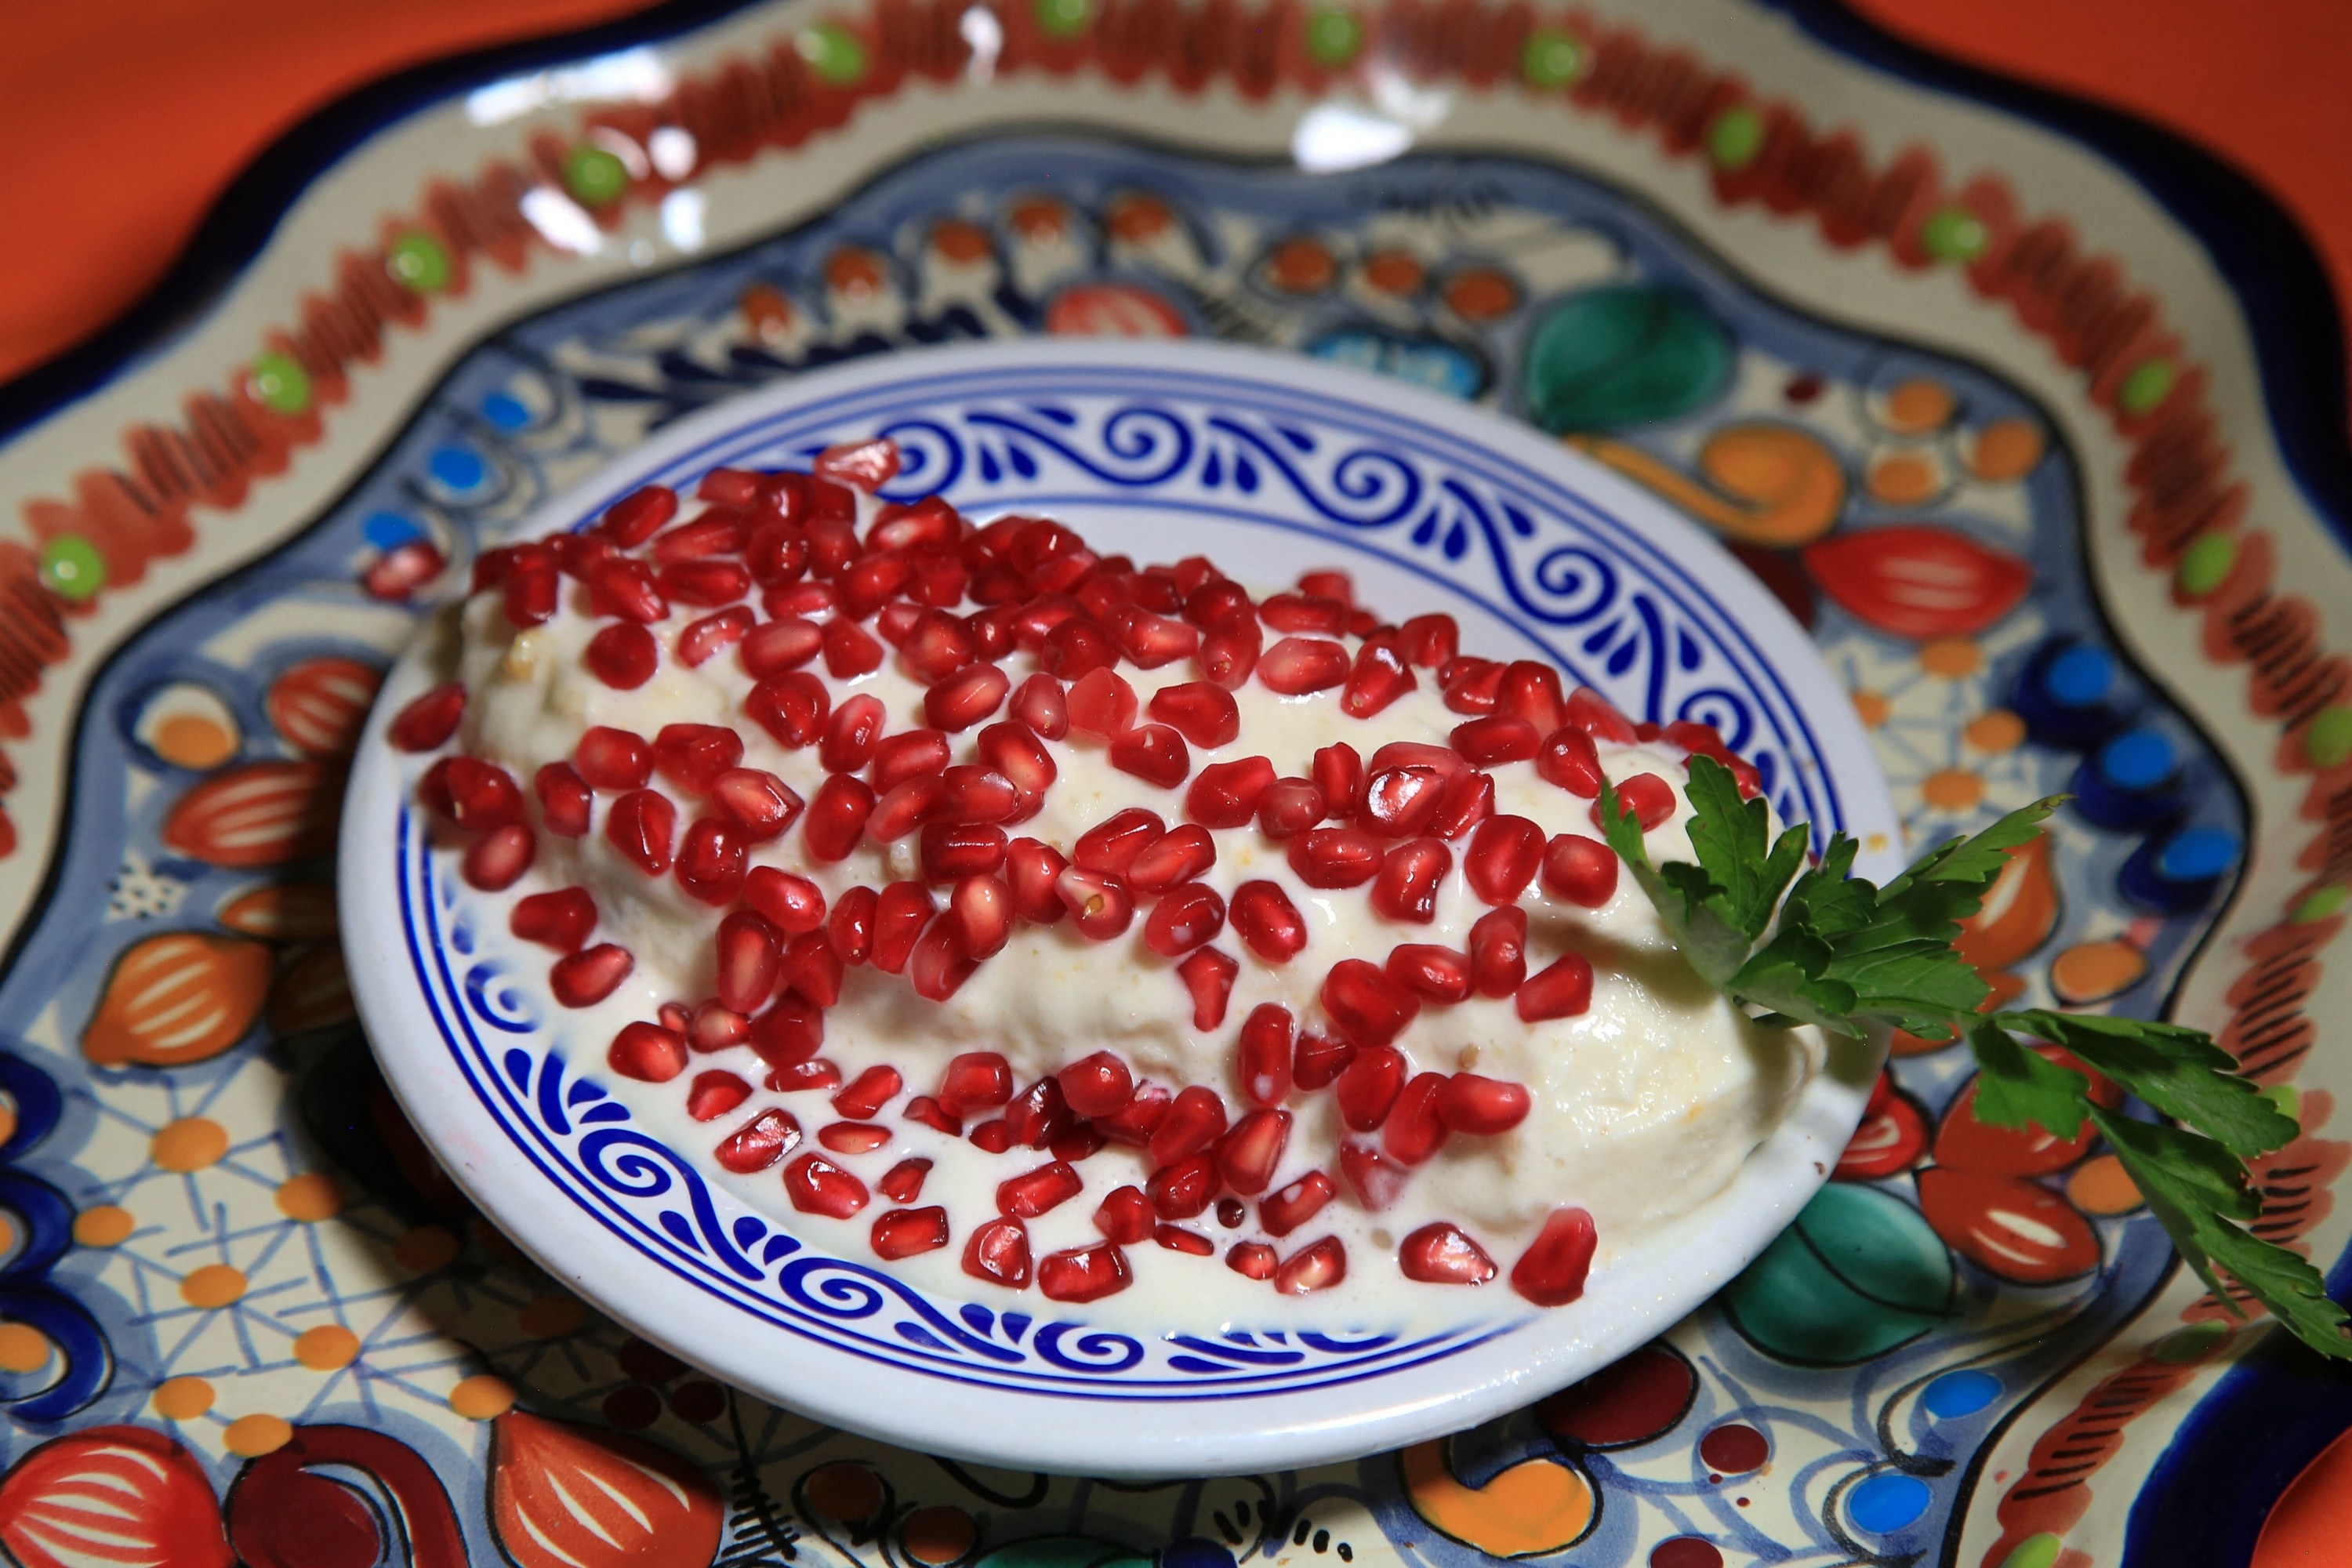 Stuffed poblano chile with nogada sauce and pomegranate seeds